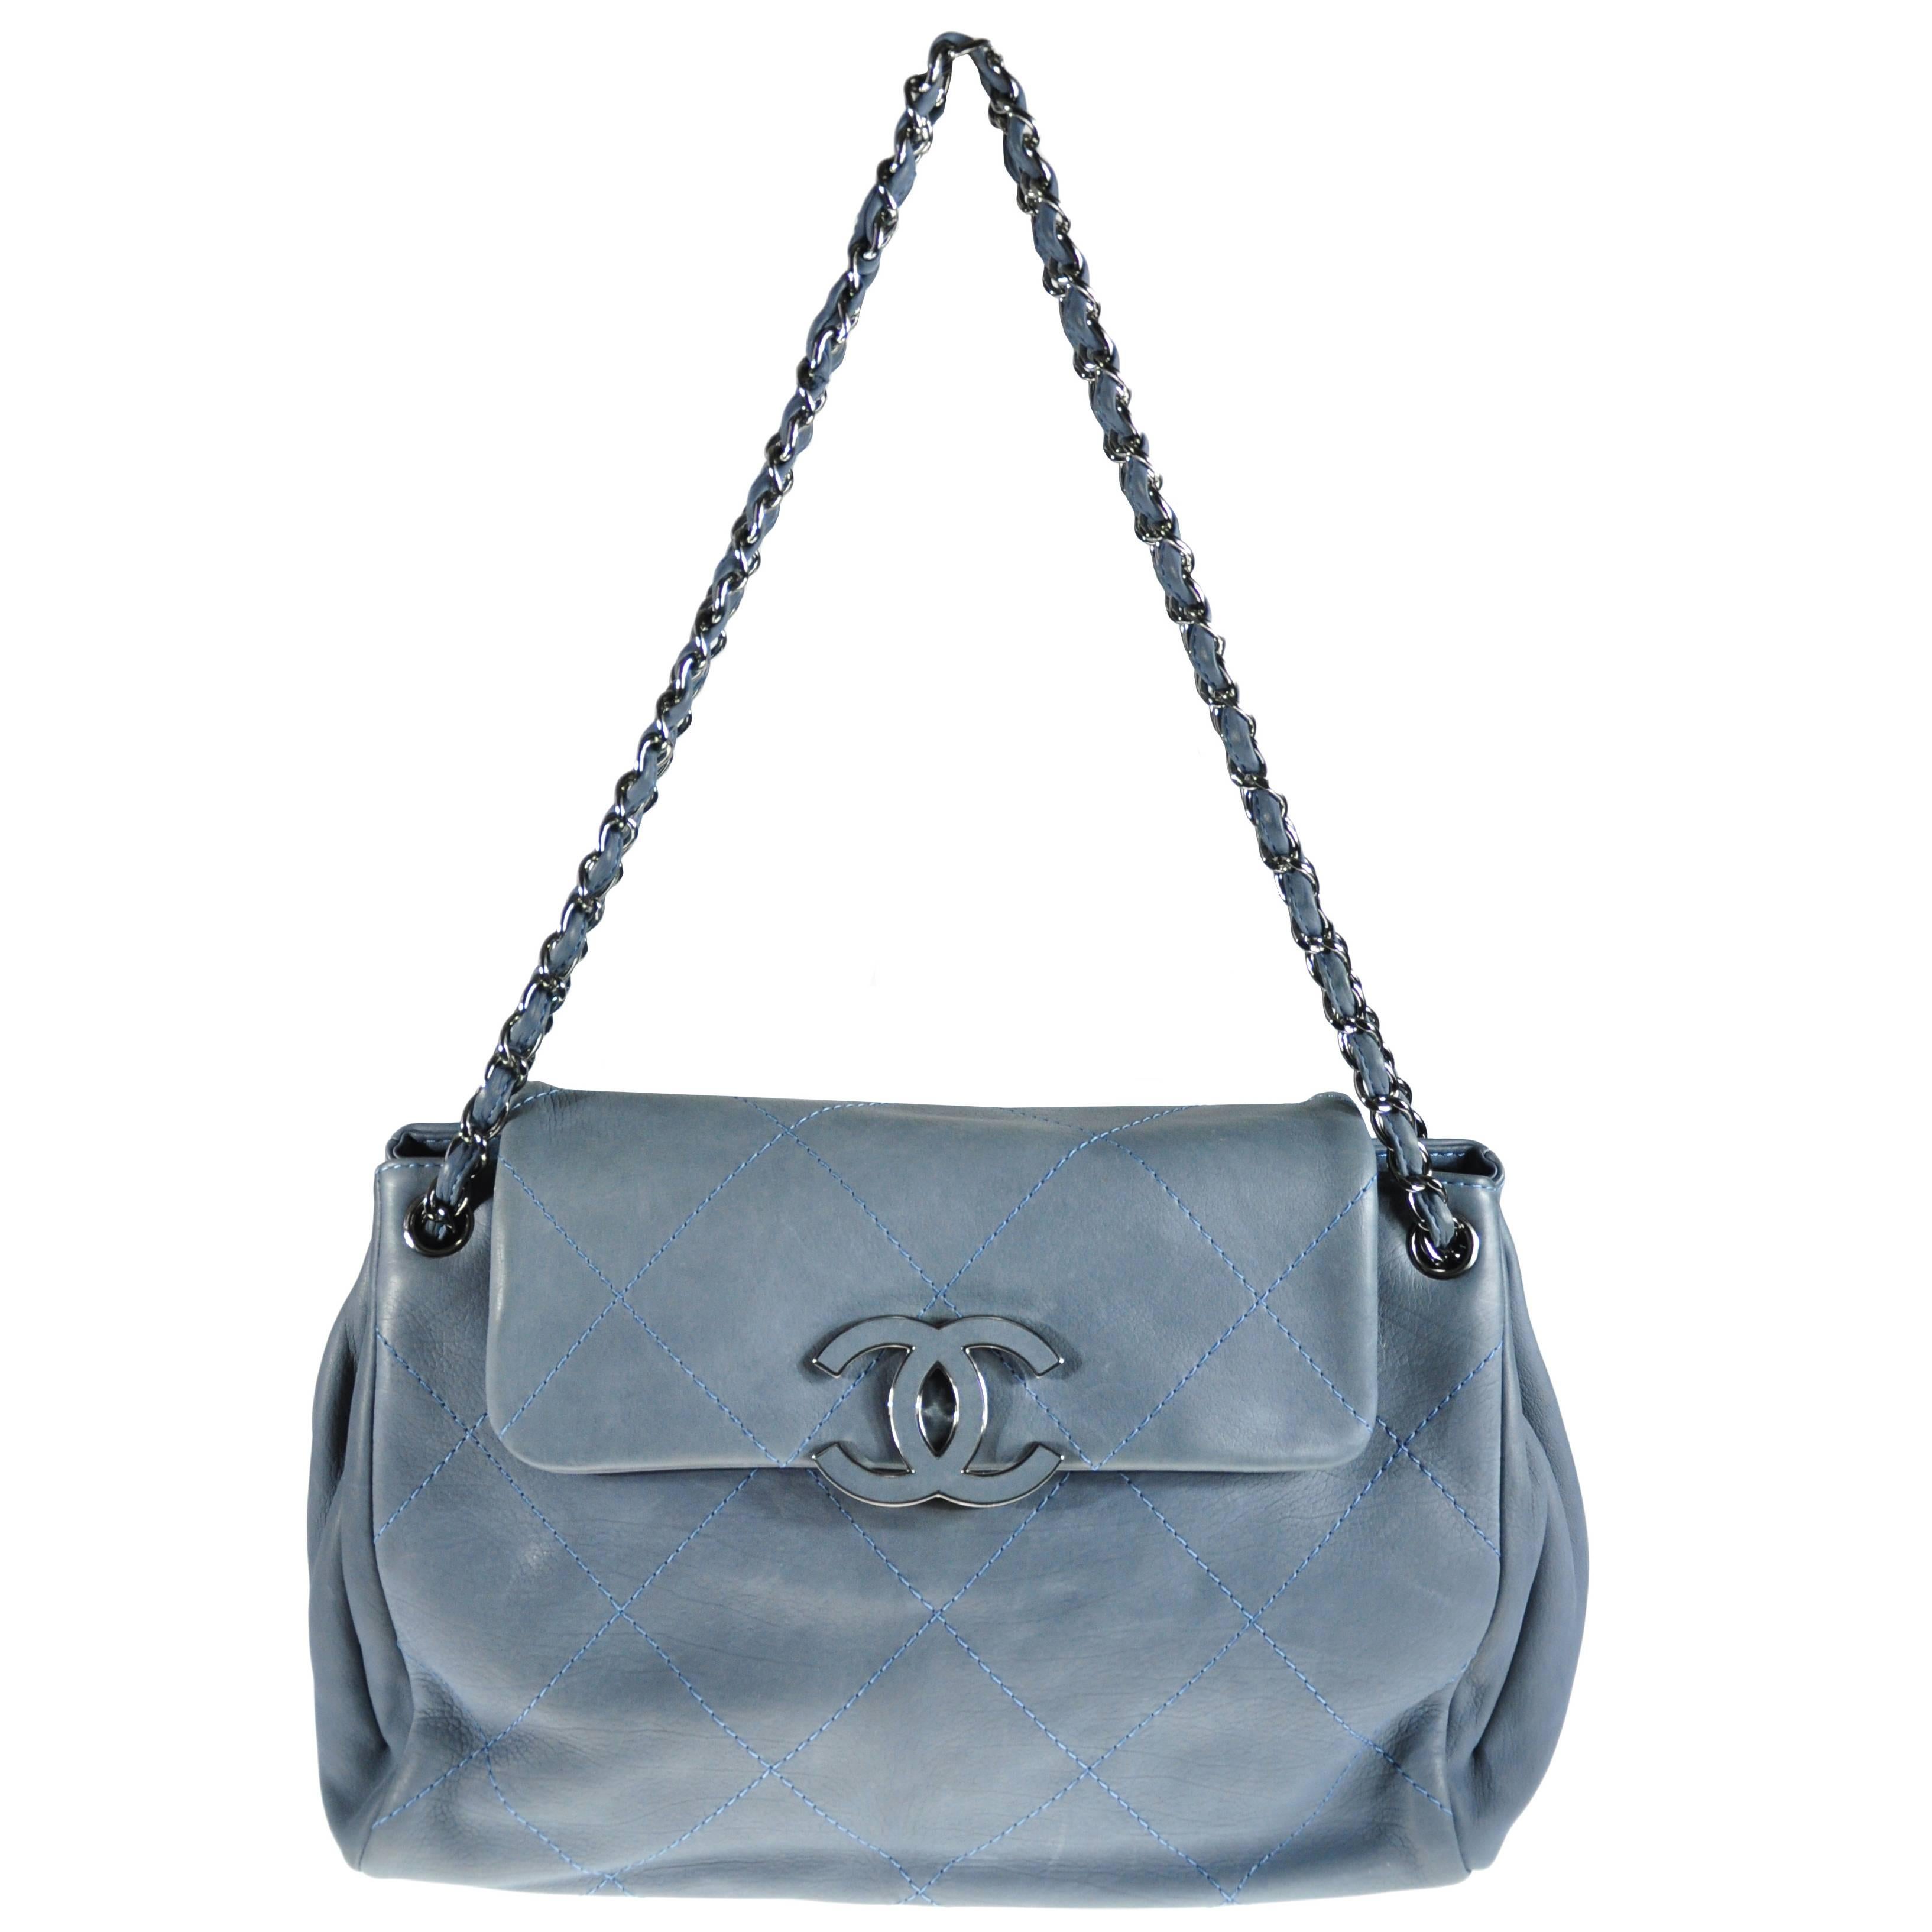 Chanel Large Blue Lilac Smooth & Soft Leather Flap Handbag For Sale